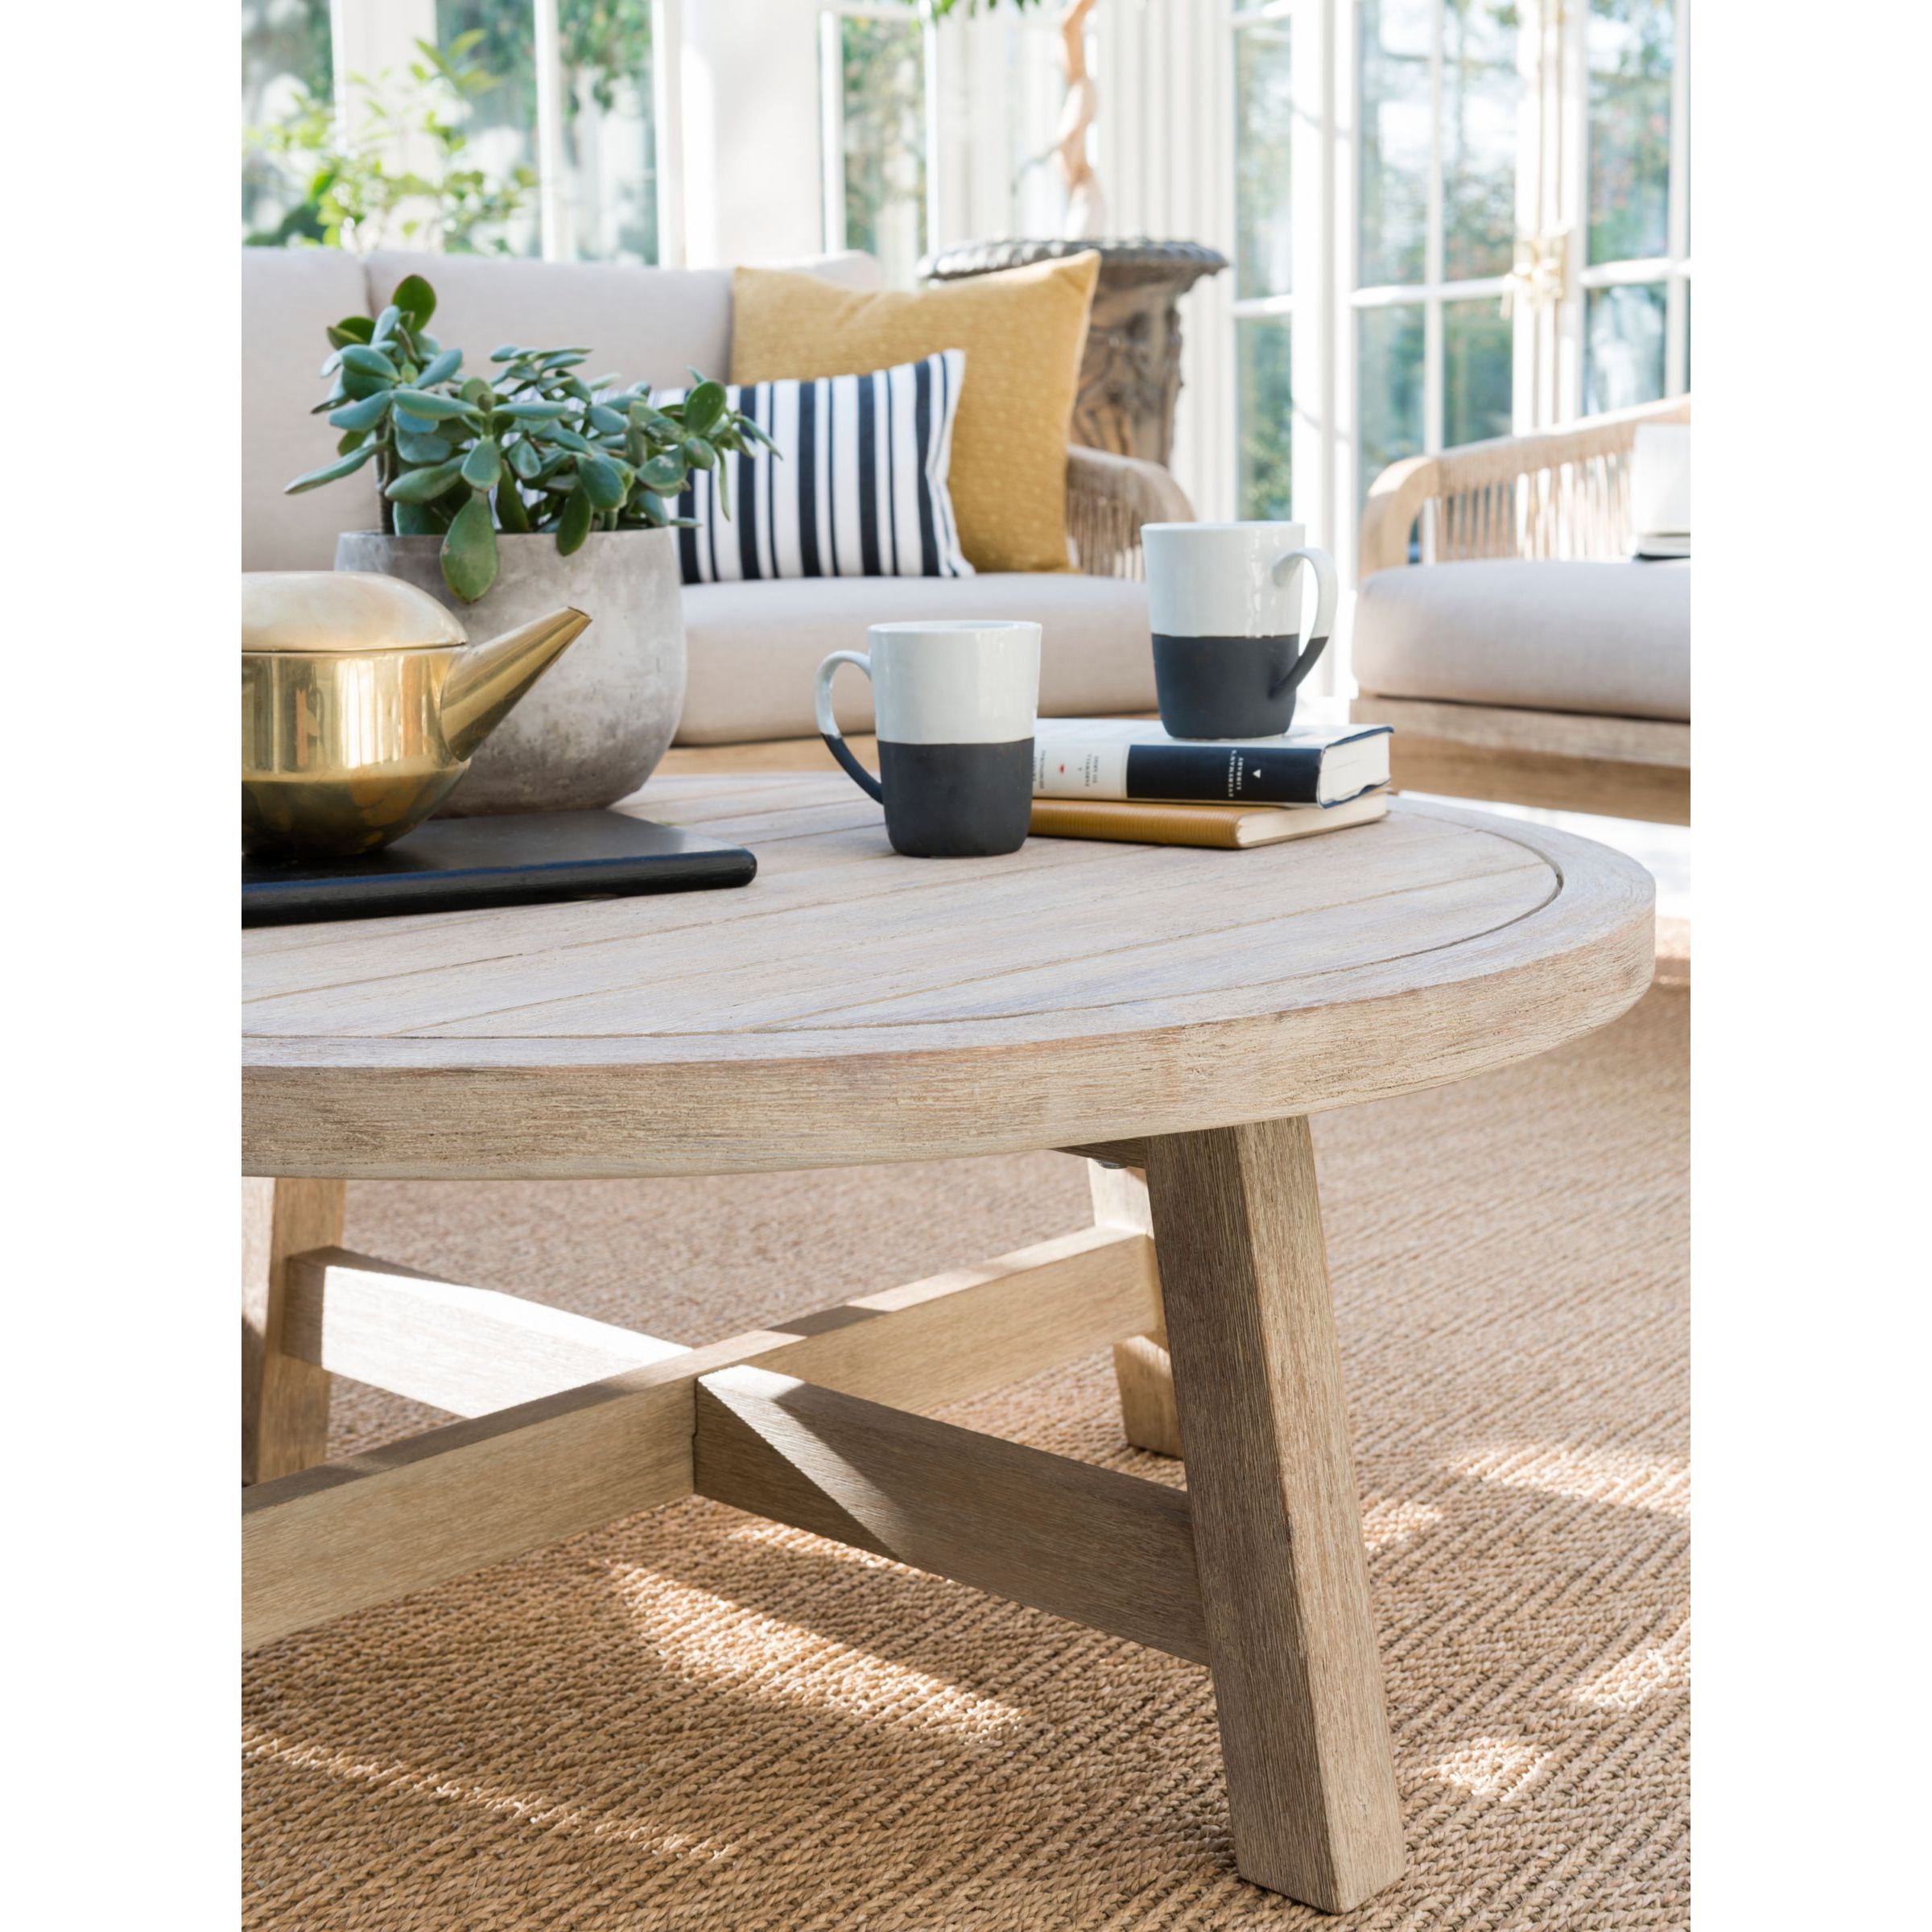 KETTLER Cora Round Garden Coffee Table, FSC-Certified (Acacia Wood), Natural - image 1